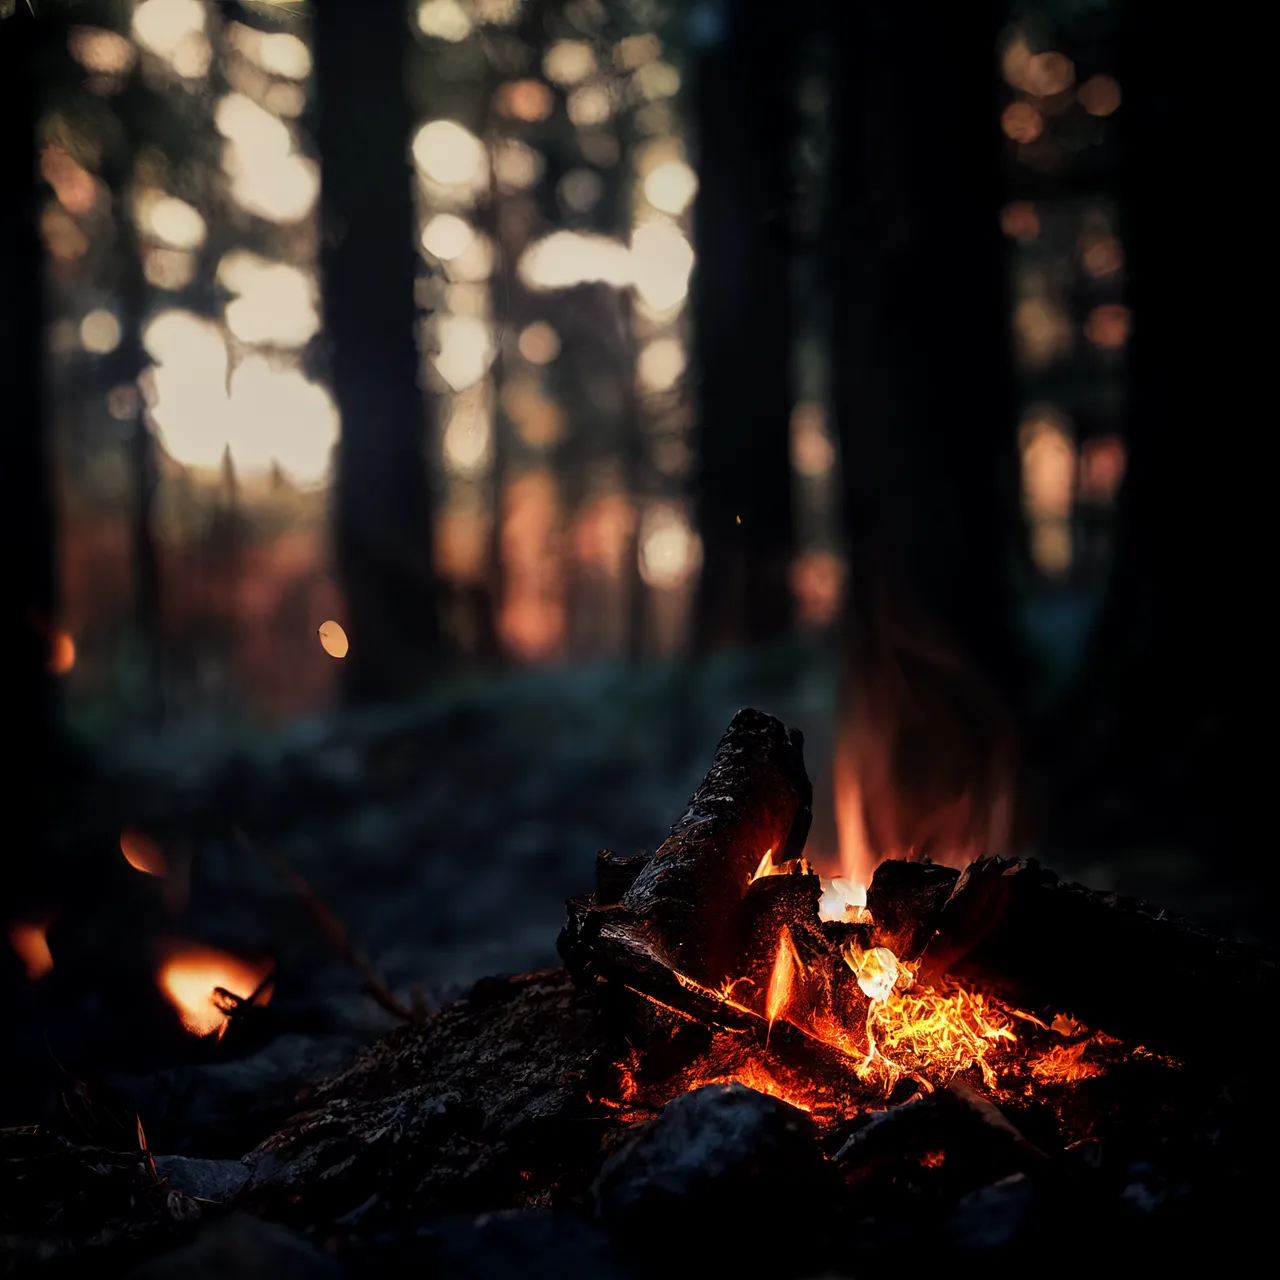 Ed_Privat_a_small_campfire_in_the_middle_of_the_forest_8K_ultra_786ce481-4b2a-47fe-8bd5-d8b60935041d.png